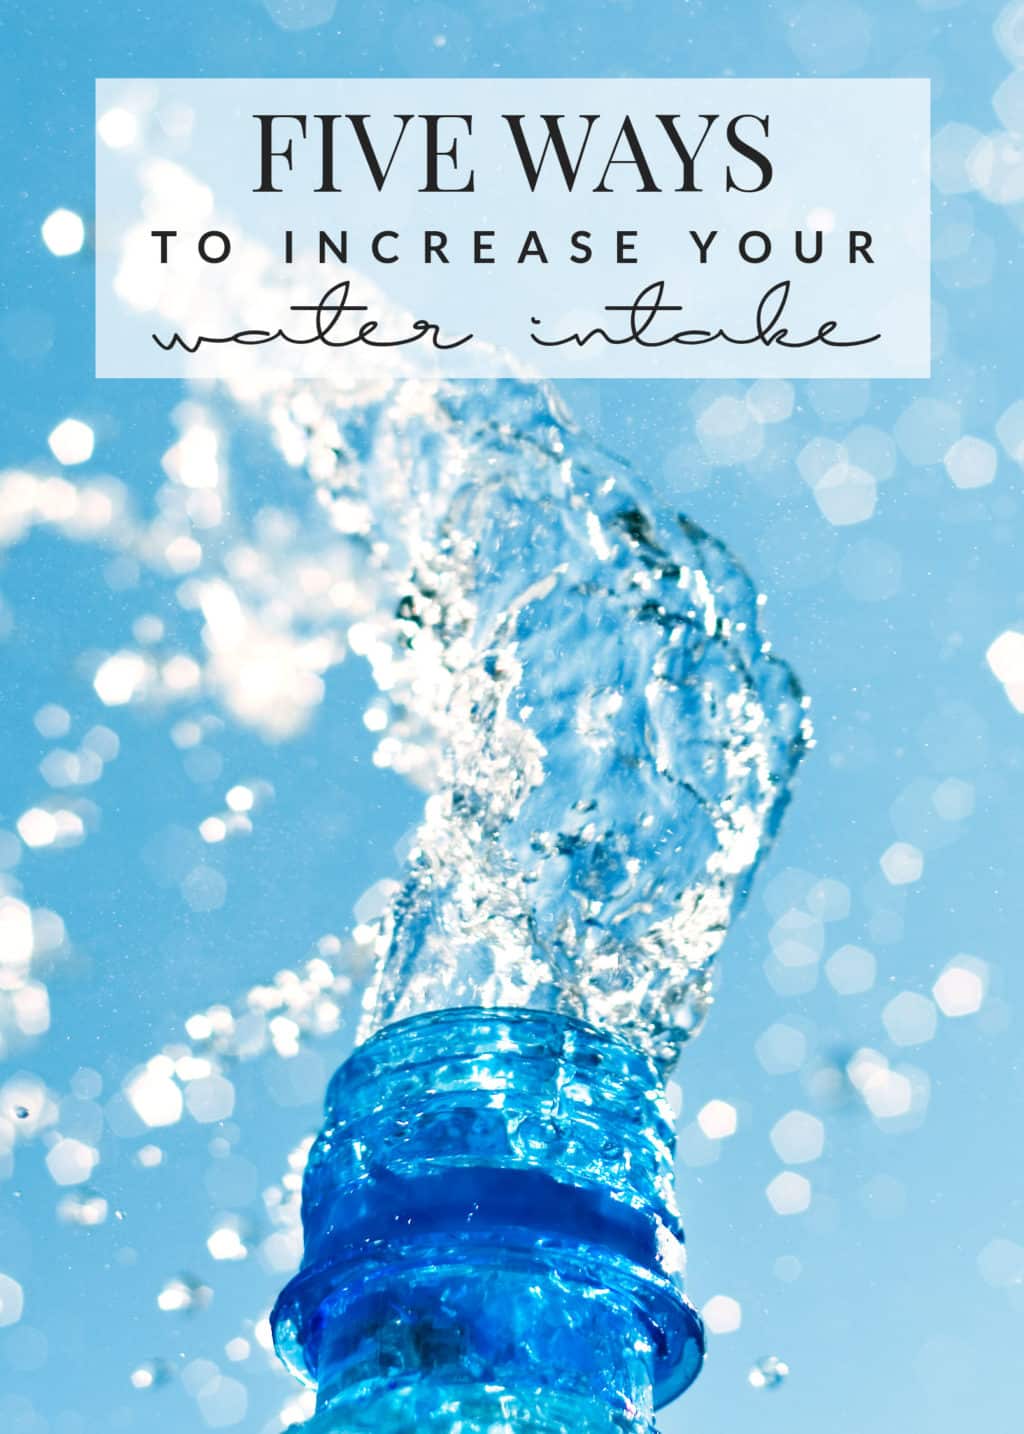 Five Ways To Increase Your Water Intake - easy tips to consume more water each day.